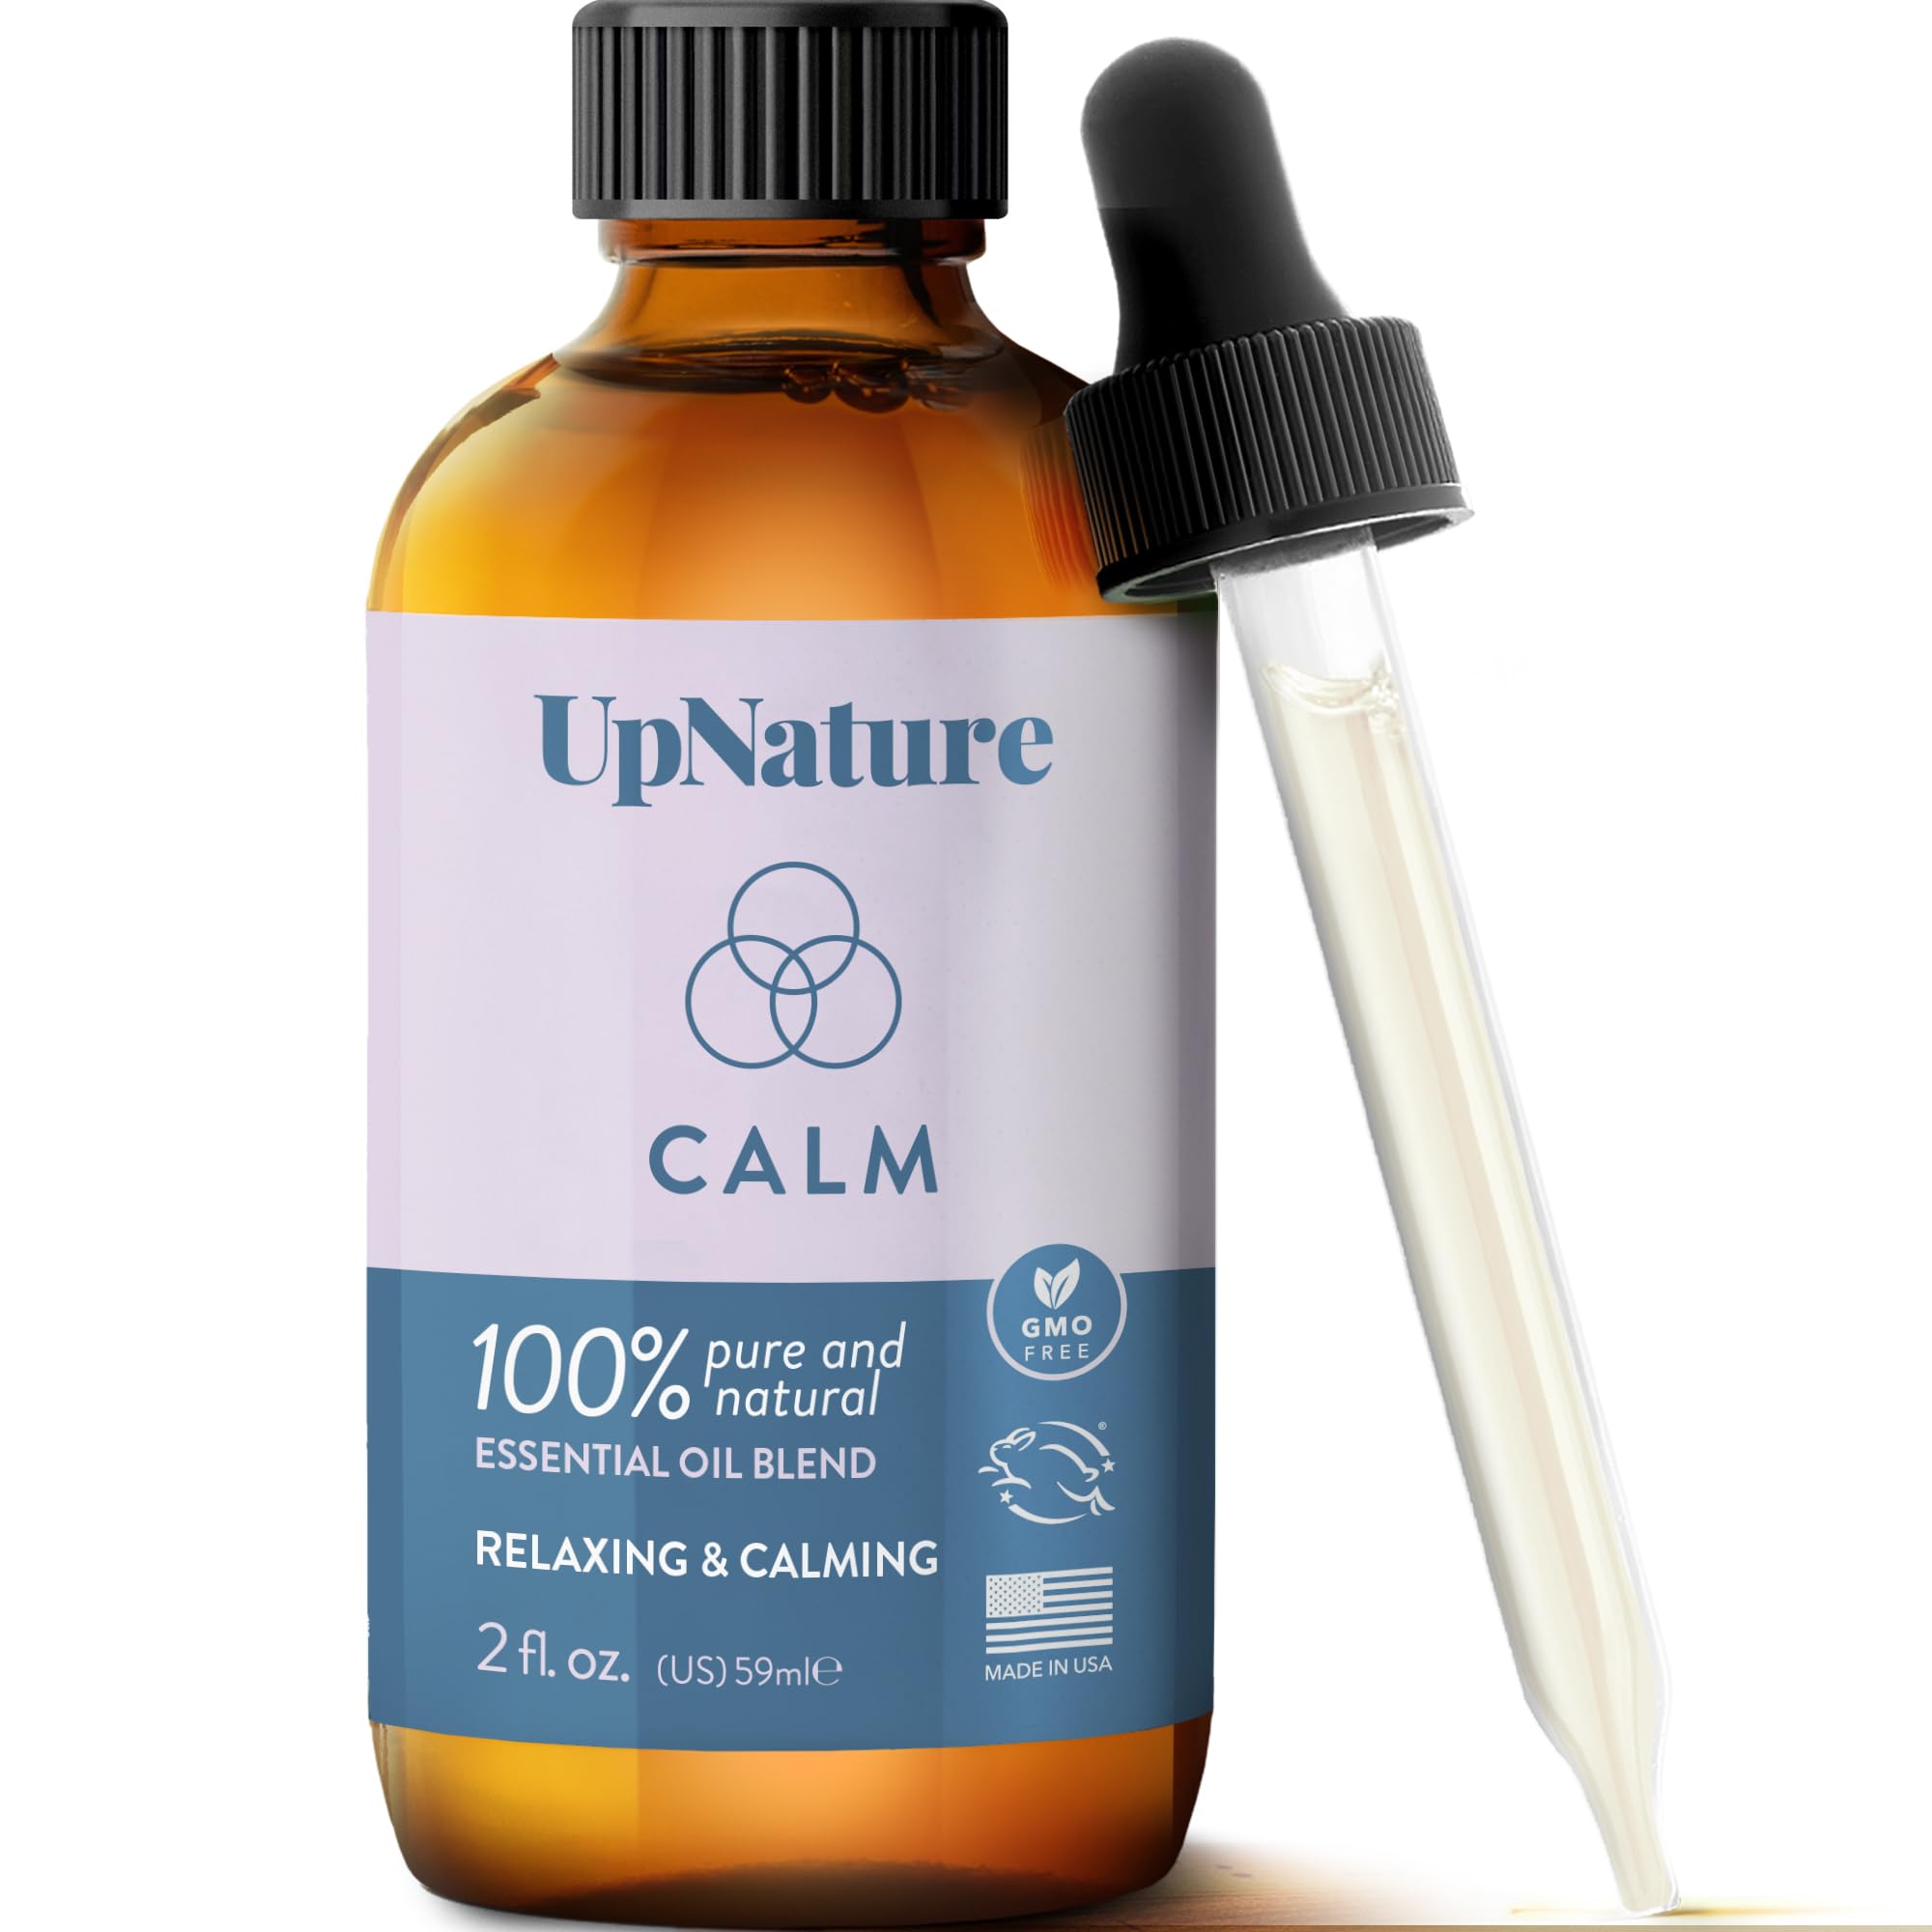 Calm Essential Oil Blend 2 oz - Stress Ease Relaxation Gifts for Women - Calm Sleep, Destress Aromatherapy Oils with Peppermint Oil, Ginger Oil   Undiluted, Therapeutic Grade